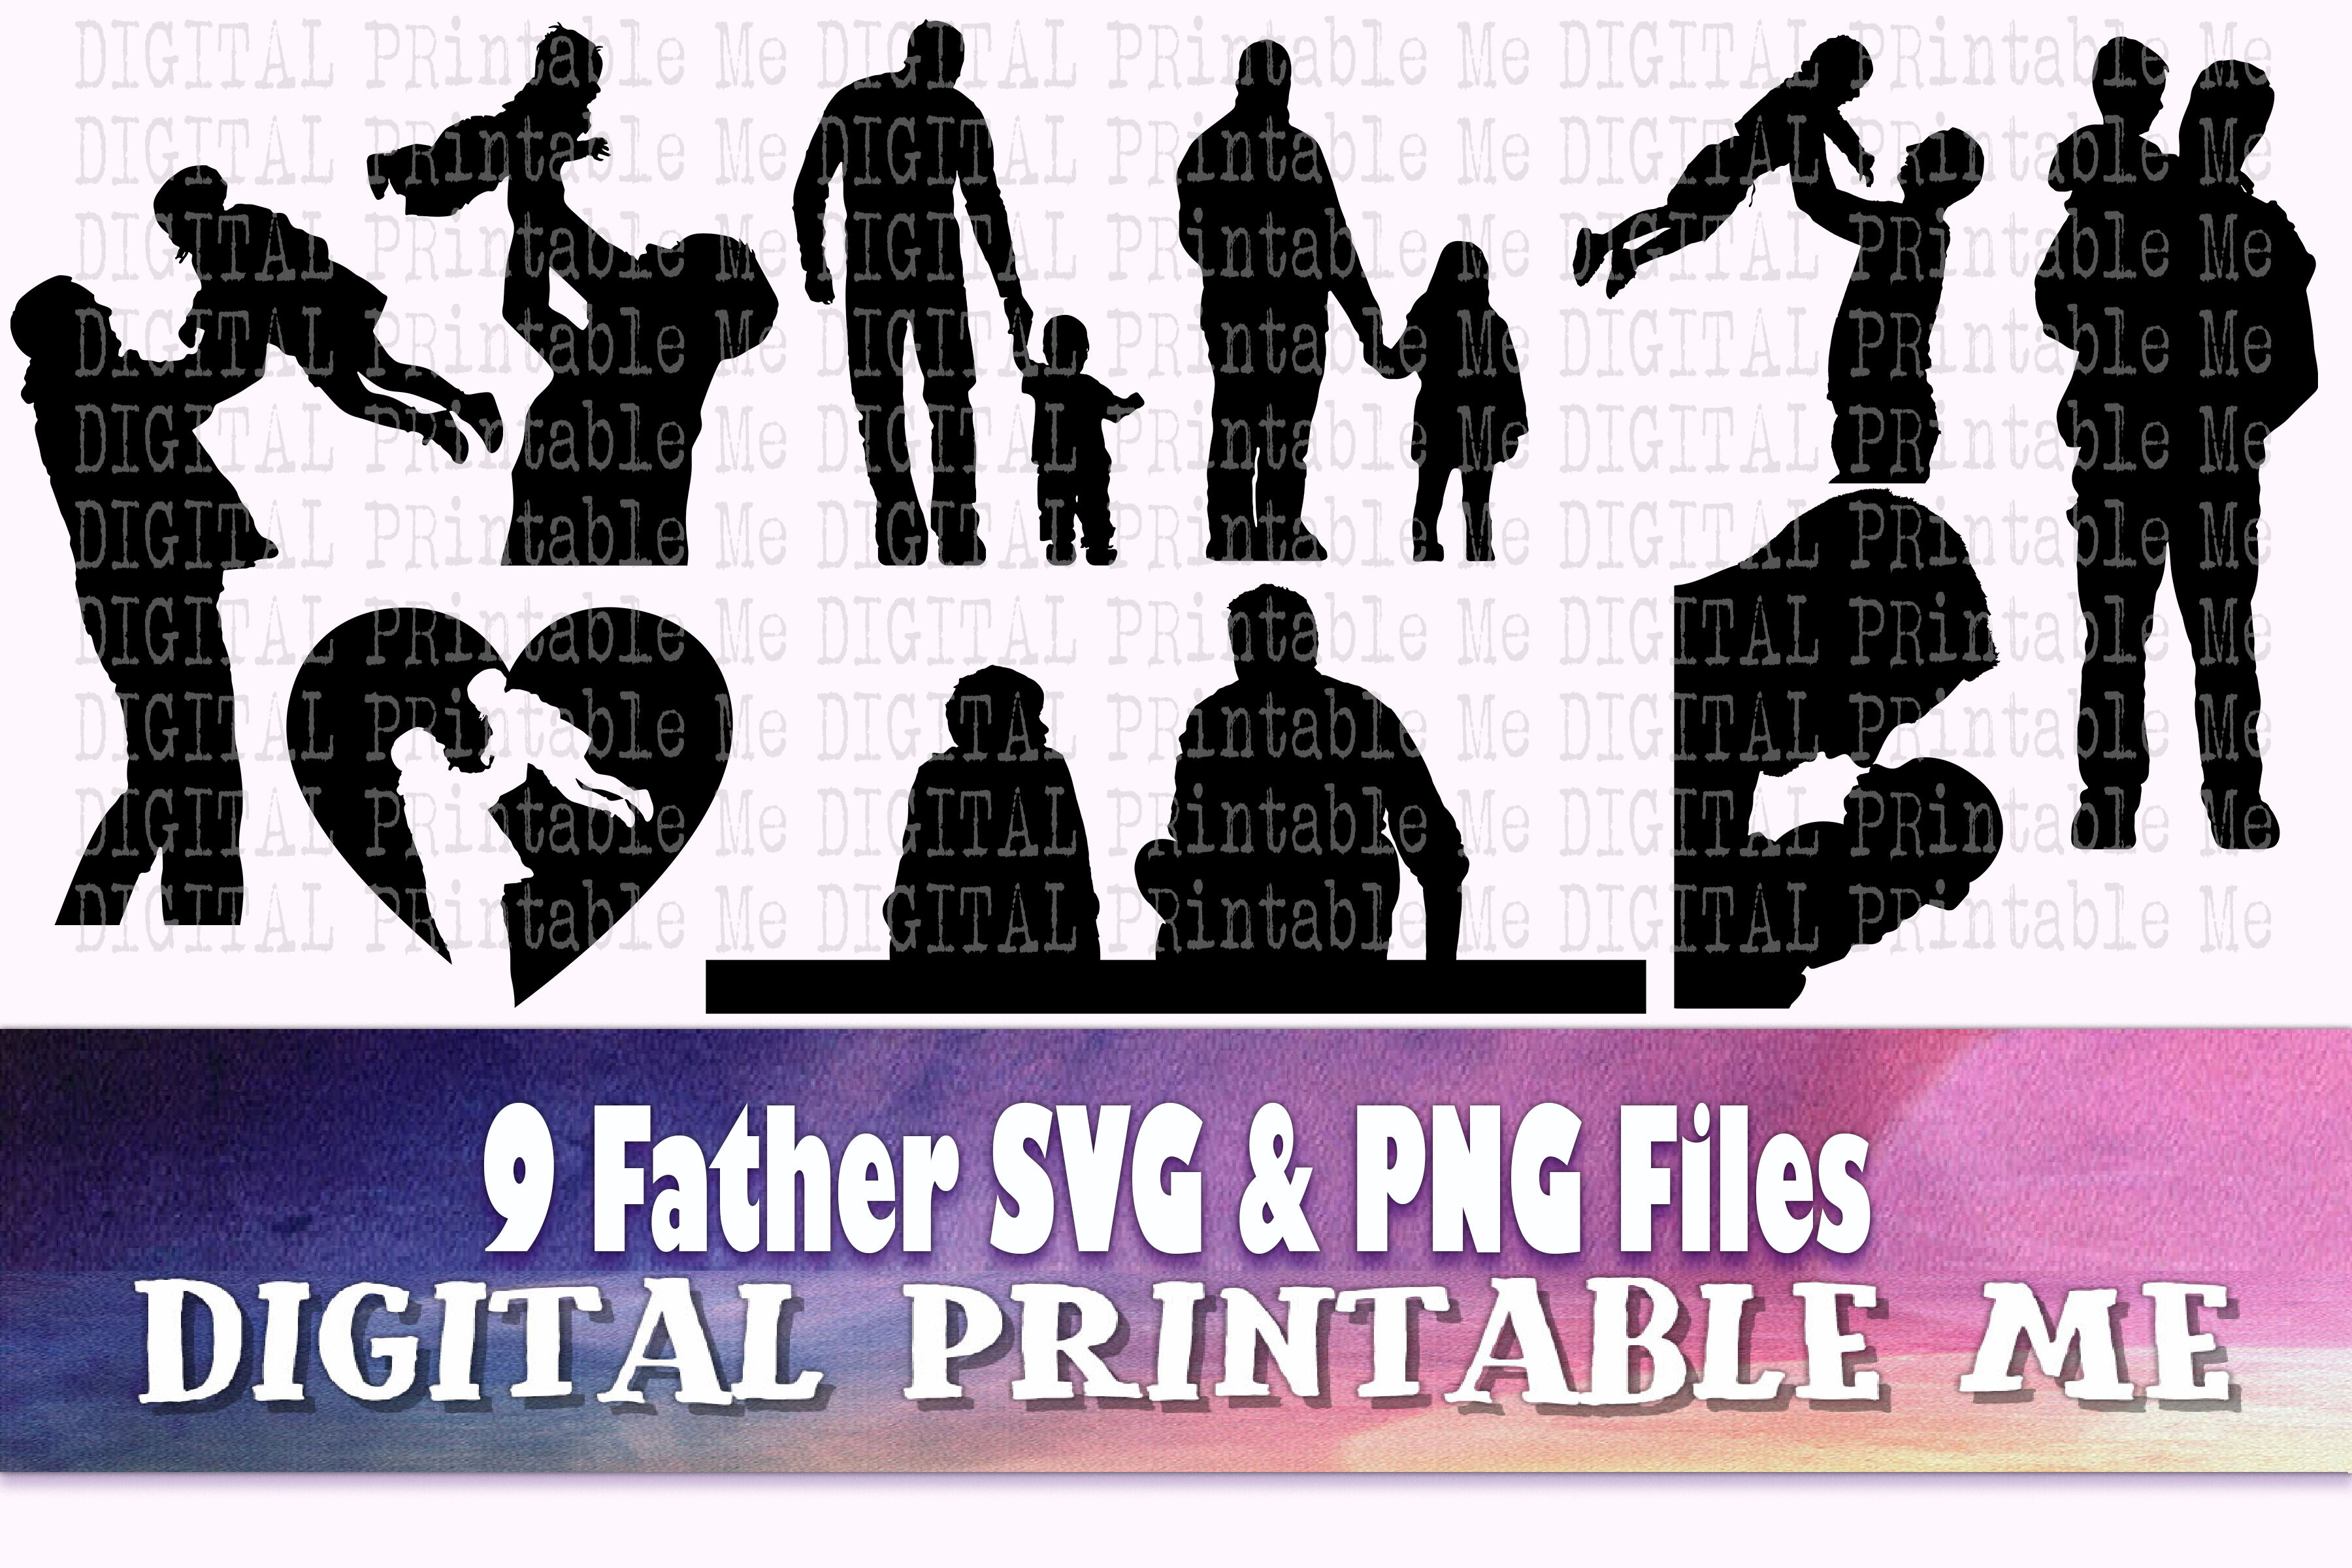 Download Father Svg Dad Son Daughter Baby Silhouette Bundle Png Clip Art 9 By Digitalprintableme Thehungryjpeg Com